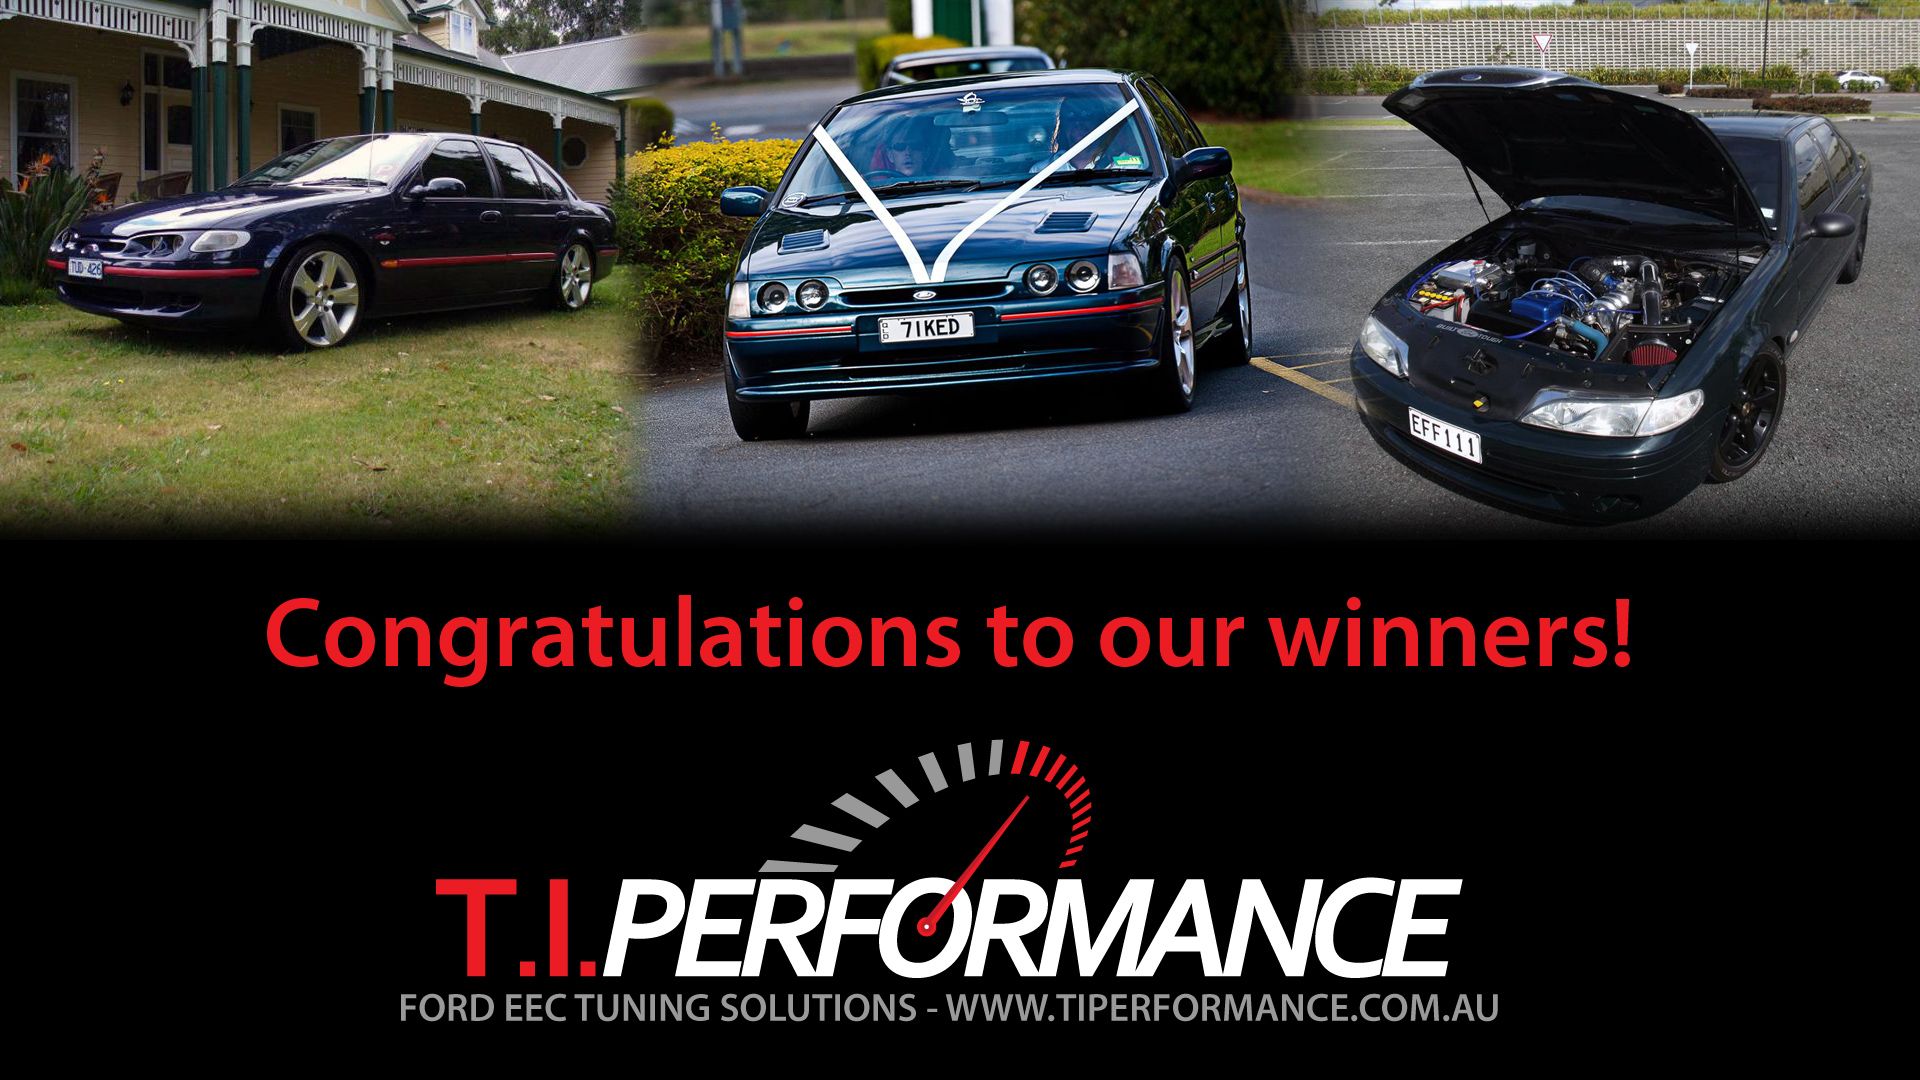 T.I. Performance Competition Prize Winners